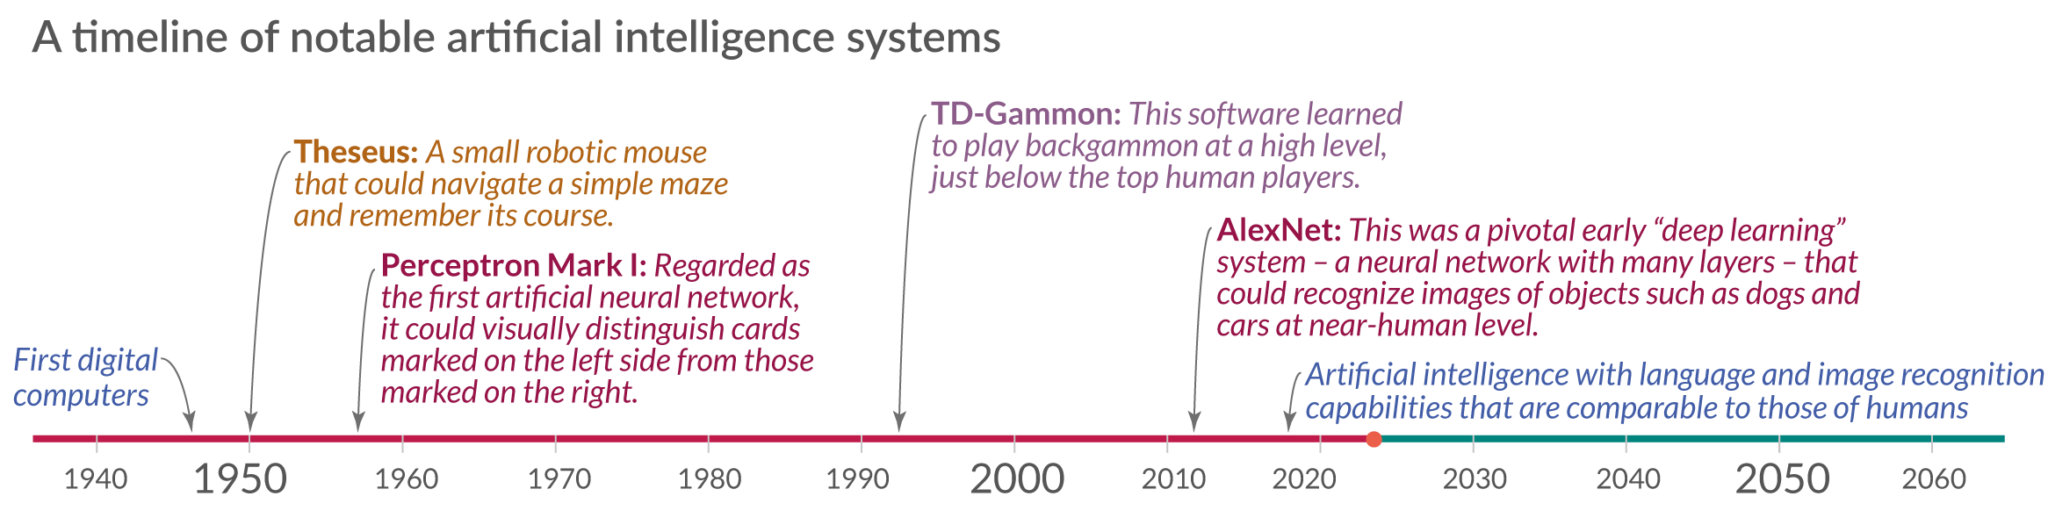 timeline of notable artificial intelligence systems